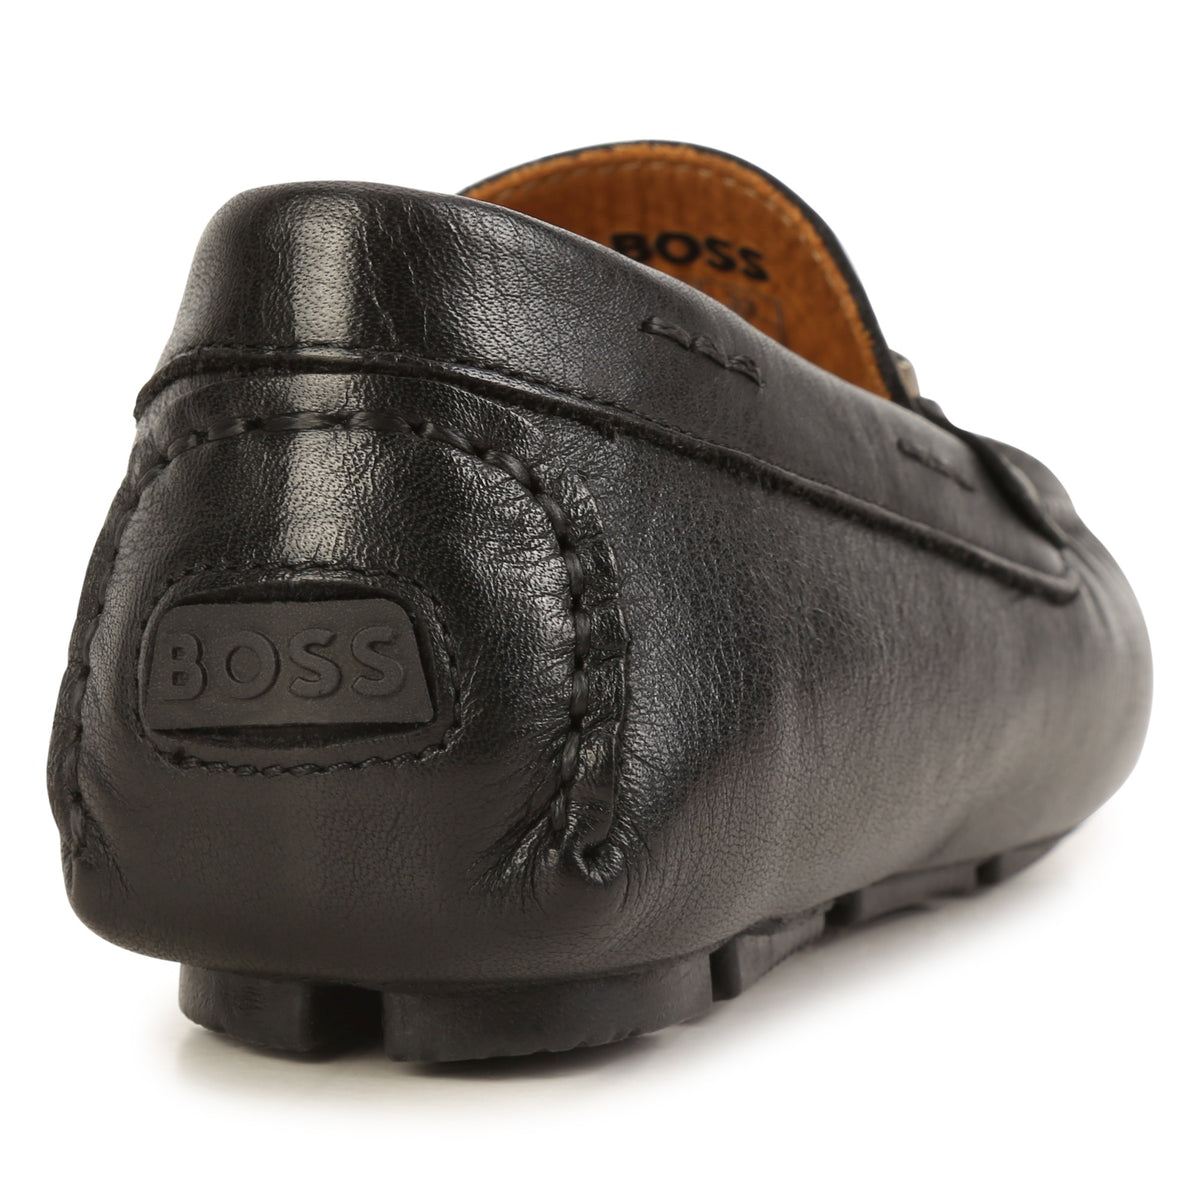 Moccasin black loafers by Hugo Boss– Flying Colors